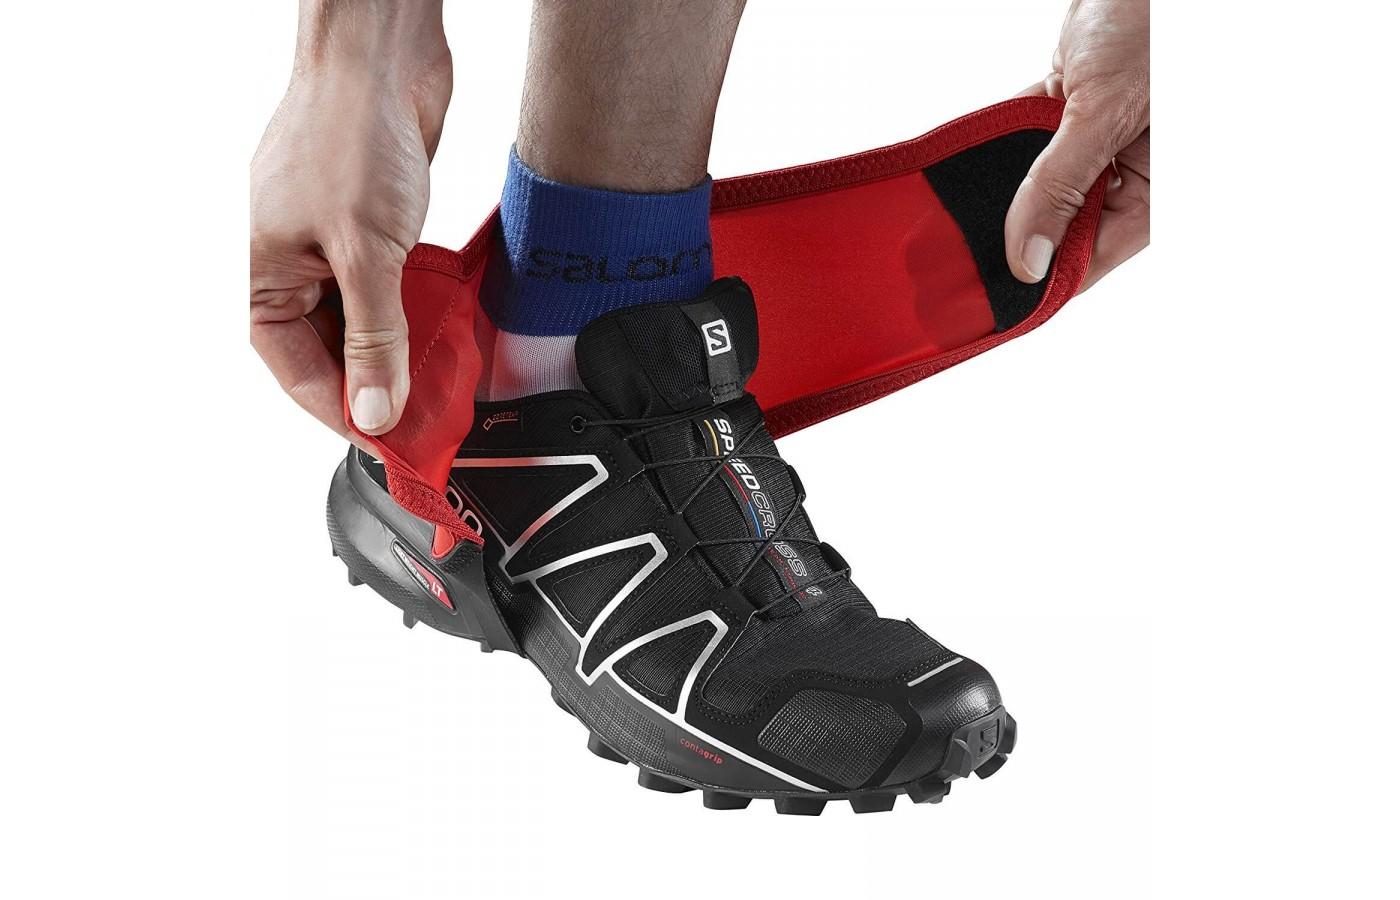 Runners appreciated that these gaiters easily fit over any shoes or hiking boots. 